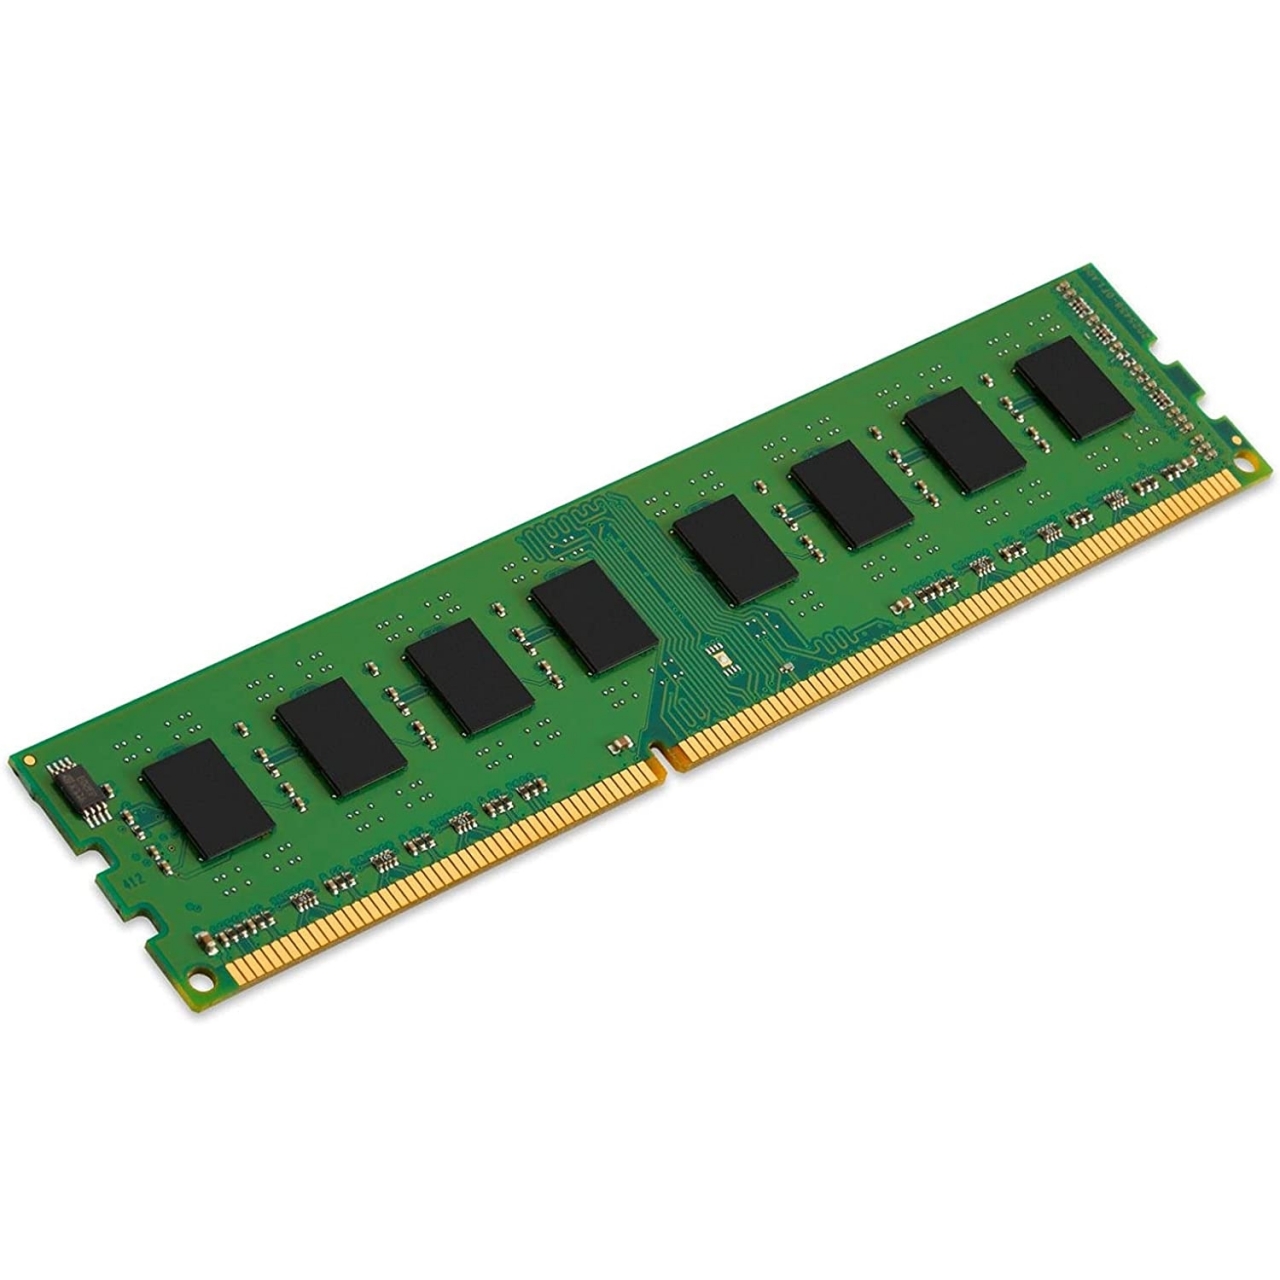 KINGSTON 4GB DDR3 1600MHZ CL11 PC RAM VALUE KVR16N11S8/4WP